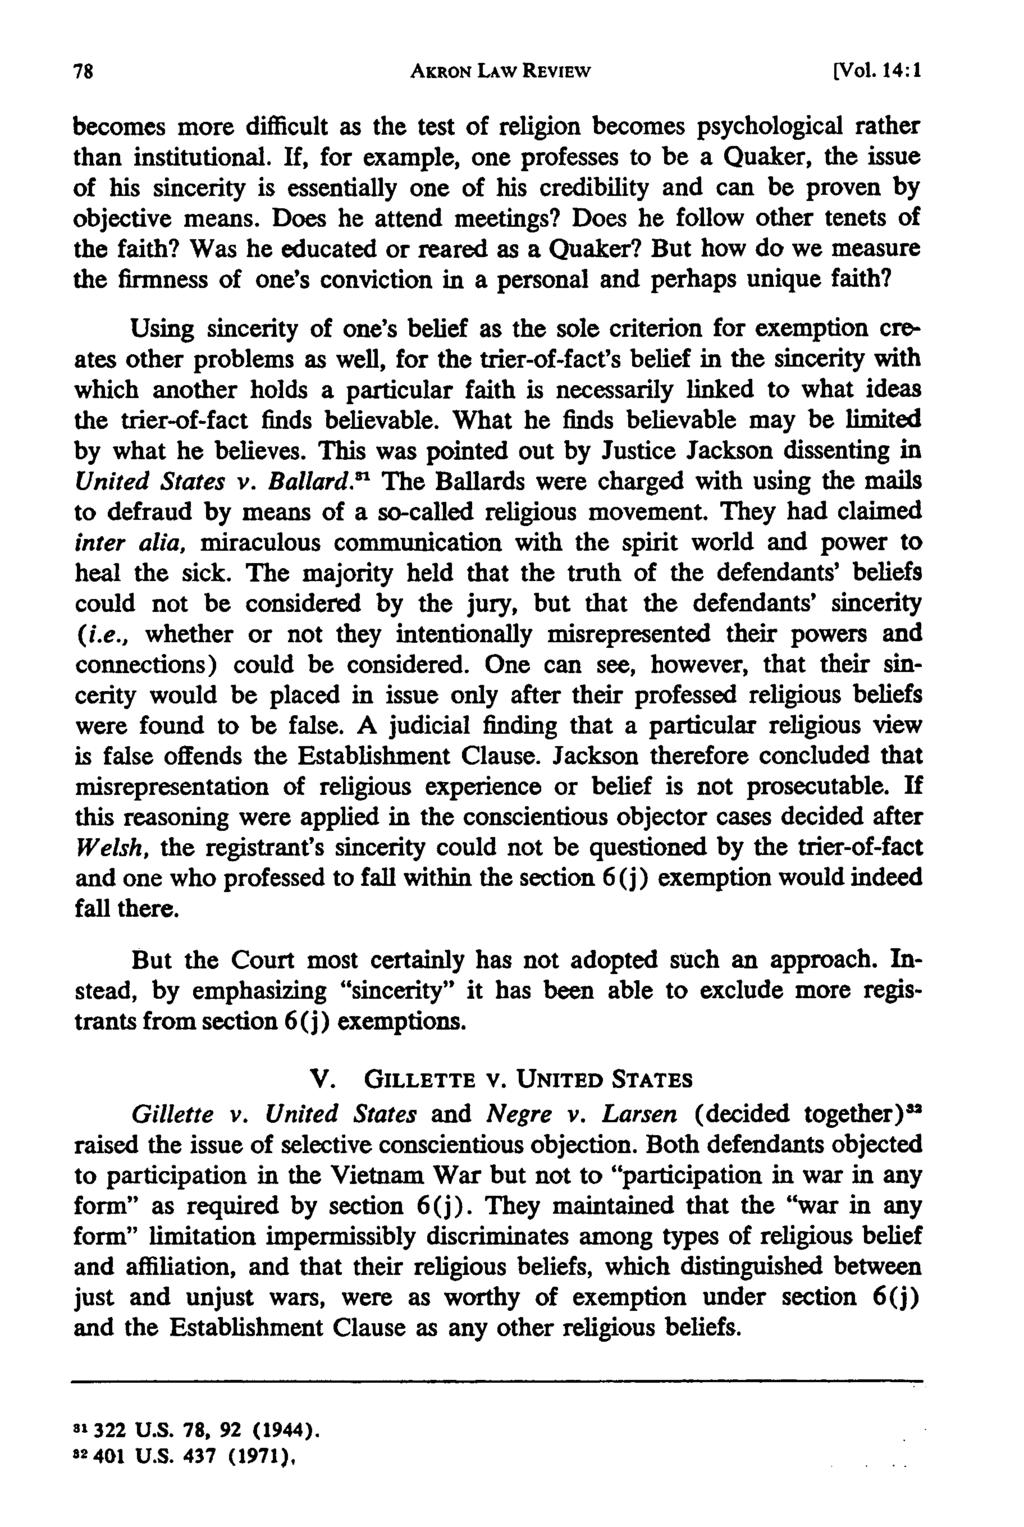 Akron Law Review, Vol. 14 [1981], Iss. 1, Art. 6 AKRON LAW REVIEW [Vol. 14:1 becomes more difficult as the test of religion becomes psychological rather than institutional.